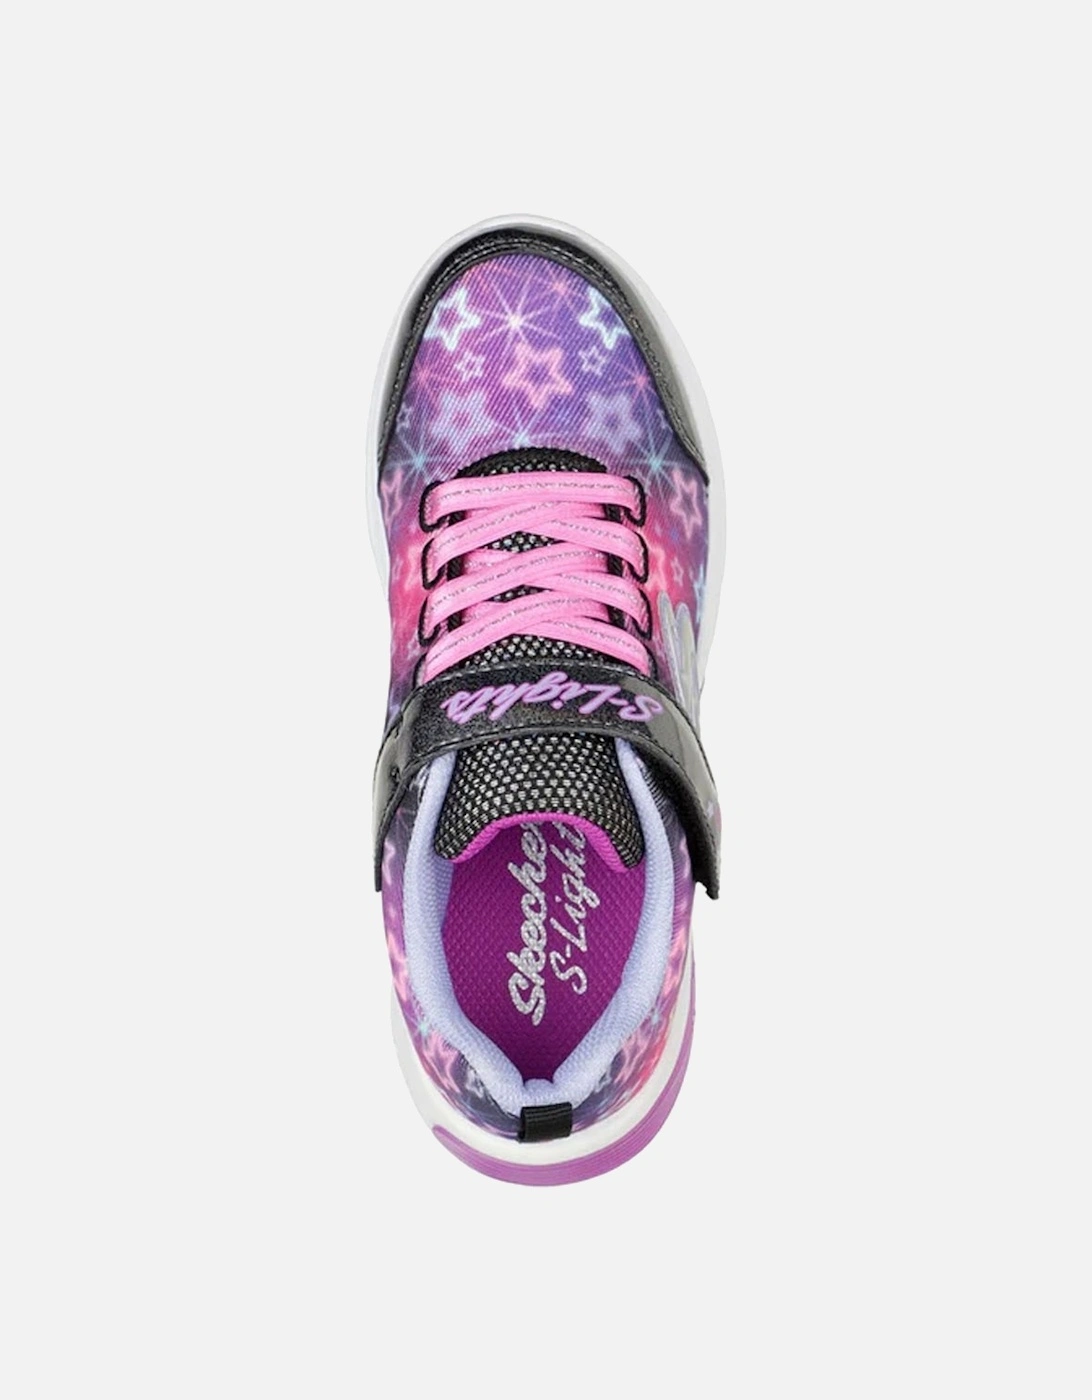 Girls Star Sparks Trainers